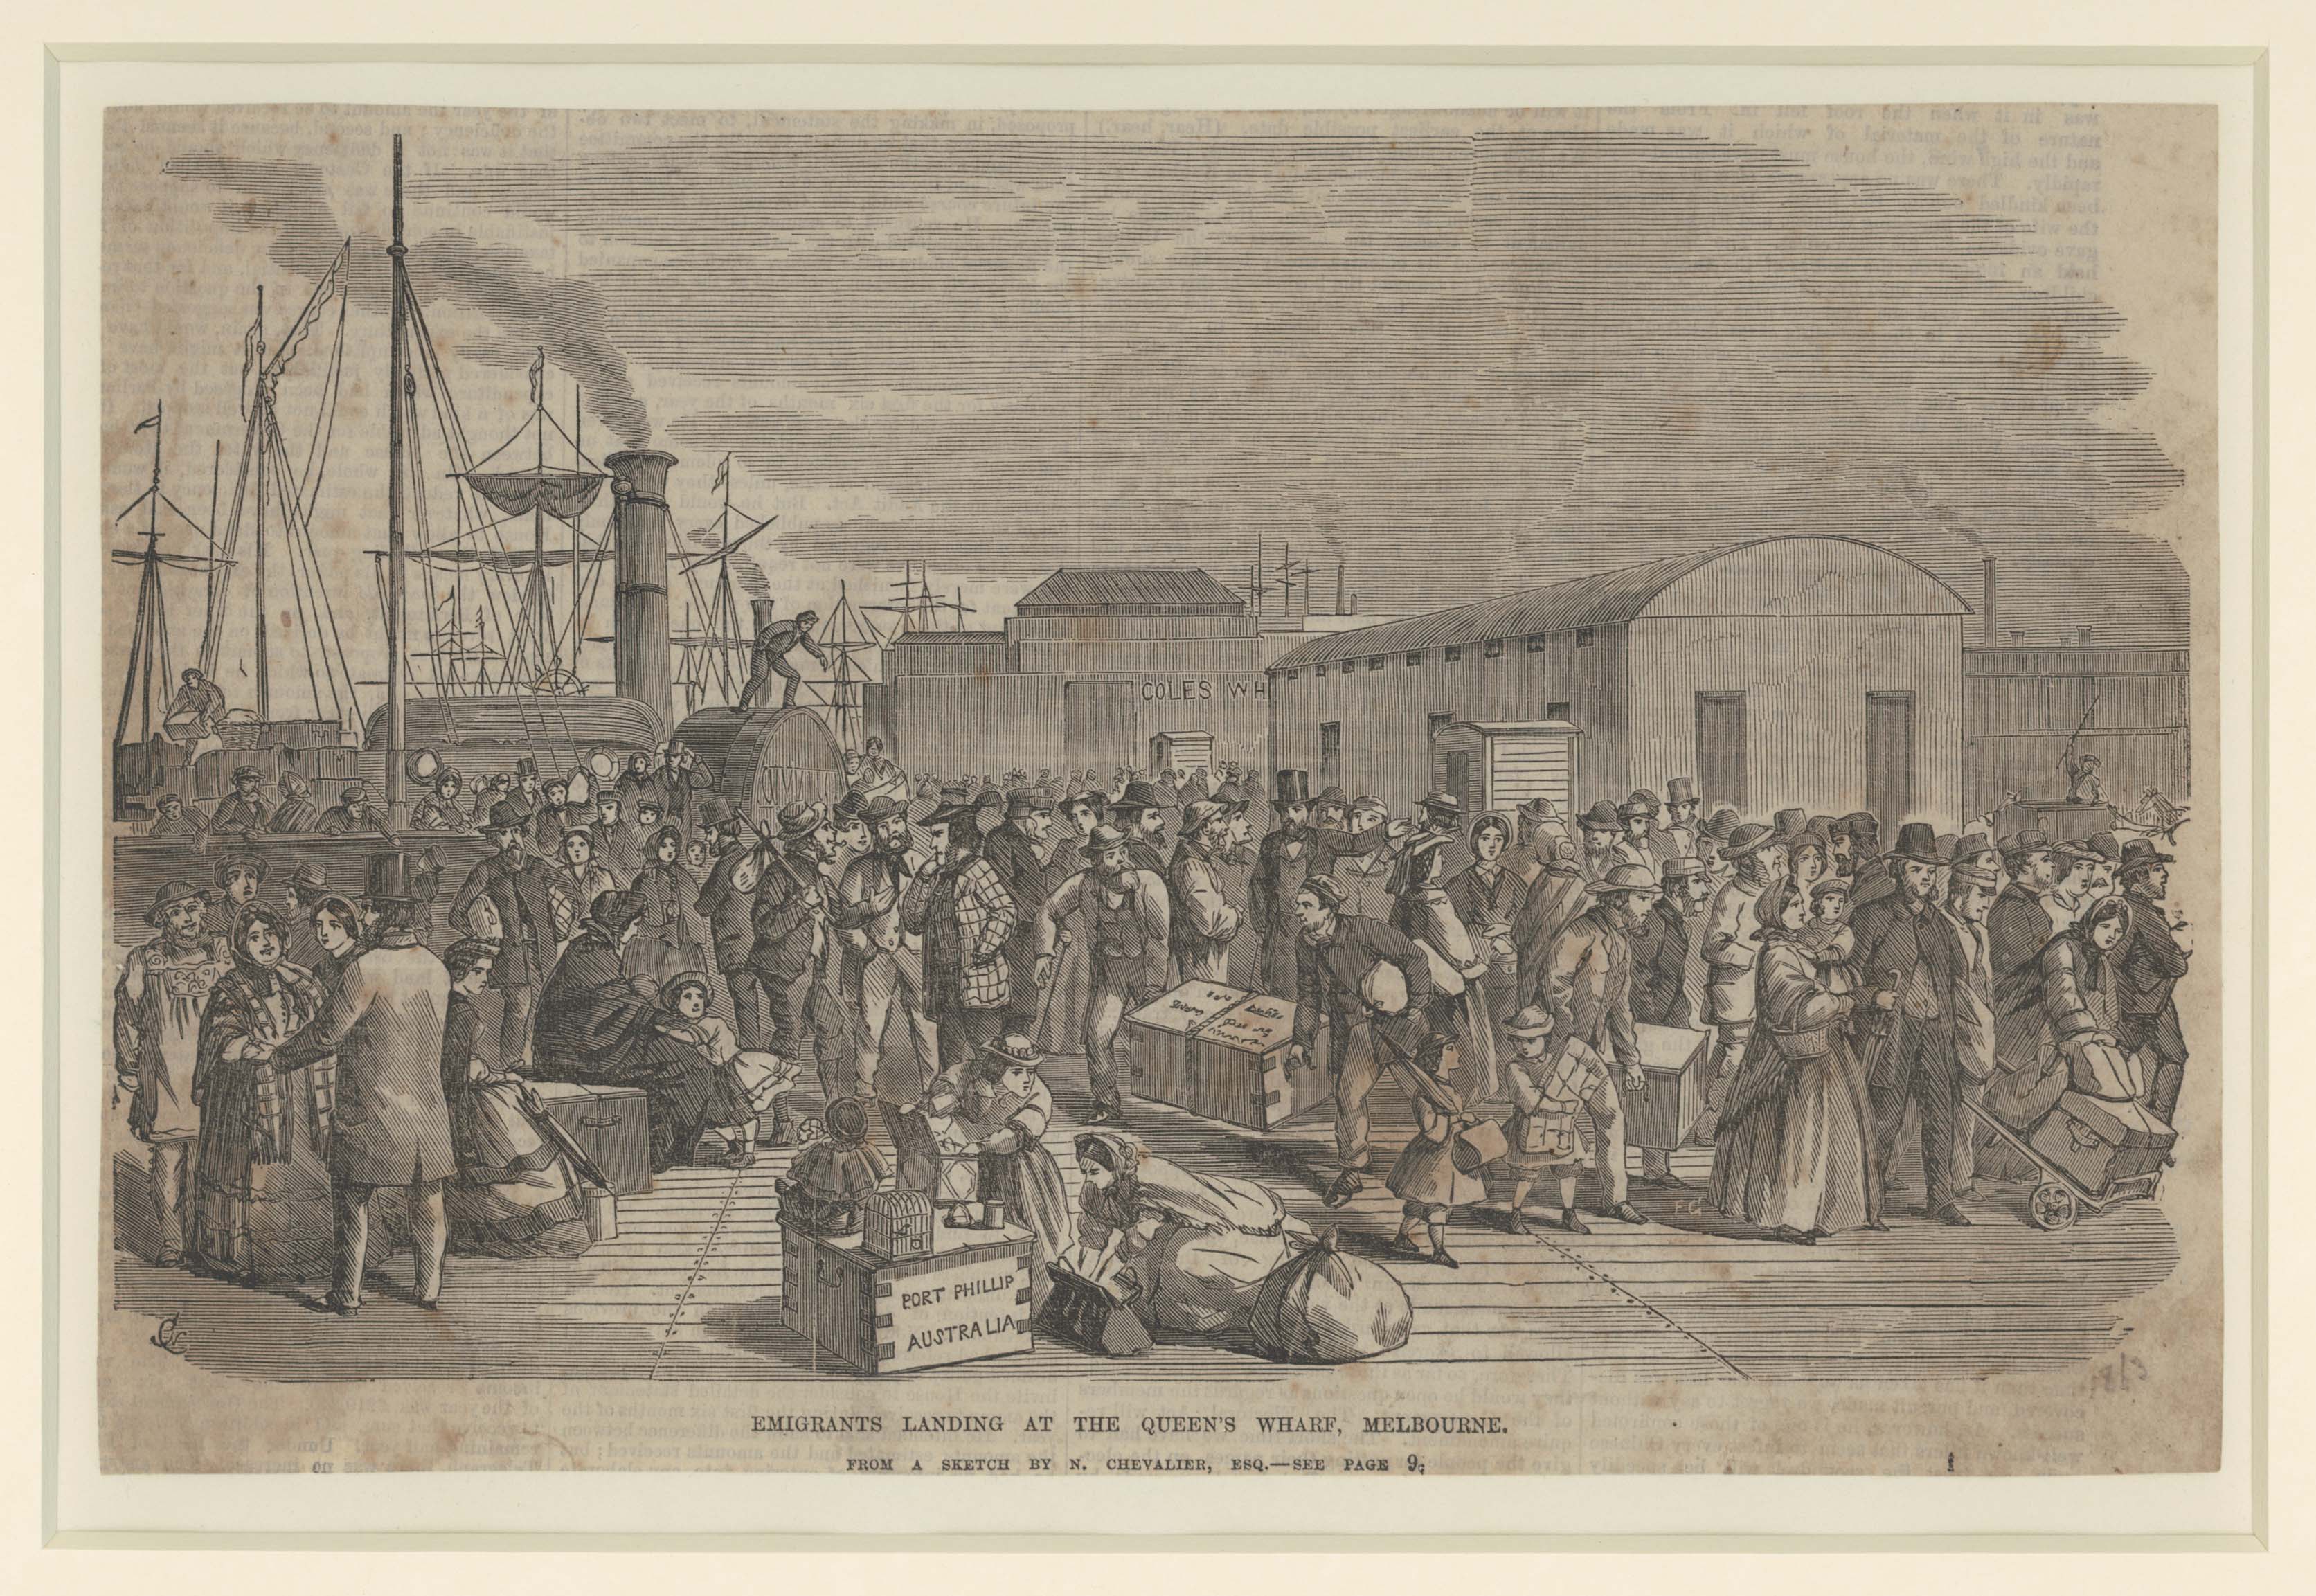 Emigrants Landing at the Queen’s Wharf, Melbourne, by Frederick Grosse. 